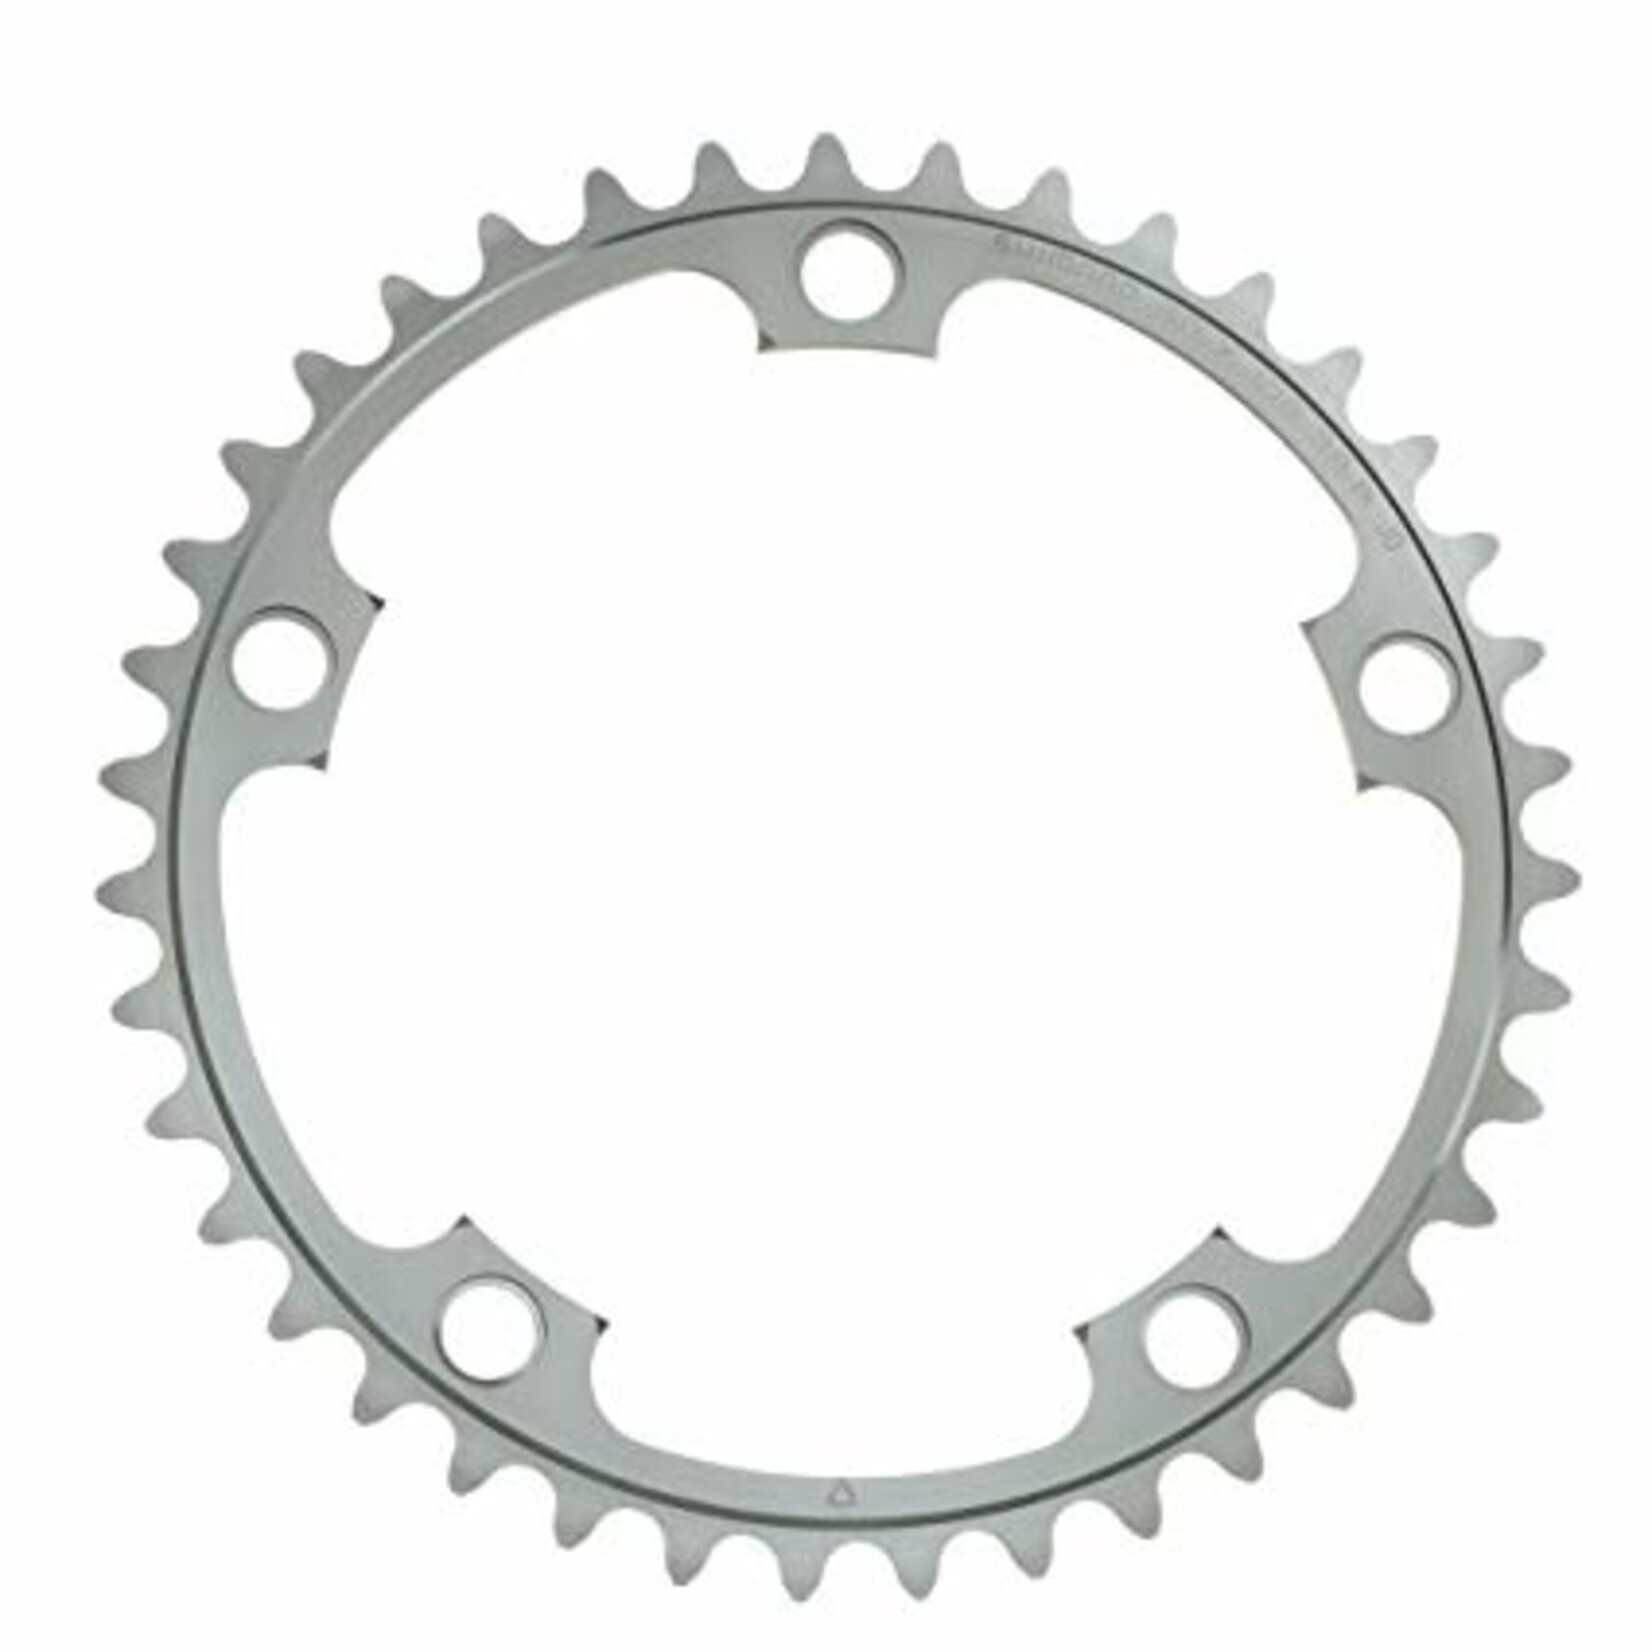 Shimano Dura-Ace Inner Chainring, 39 Tooth, 5 Bolt